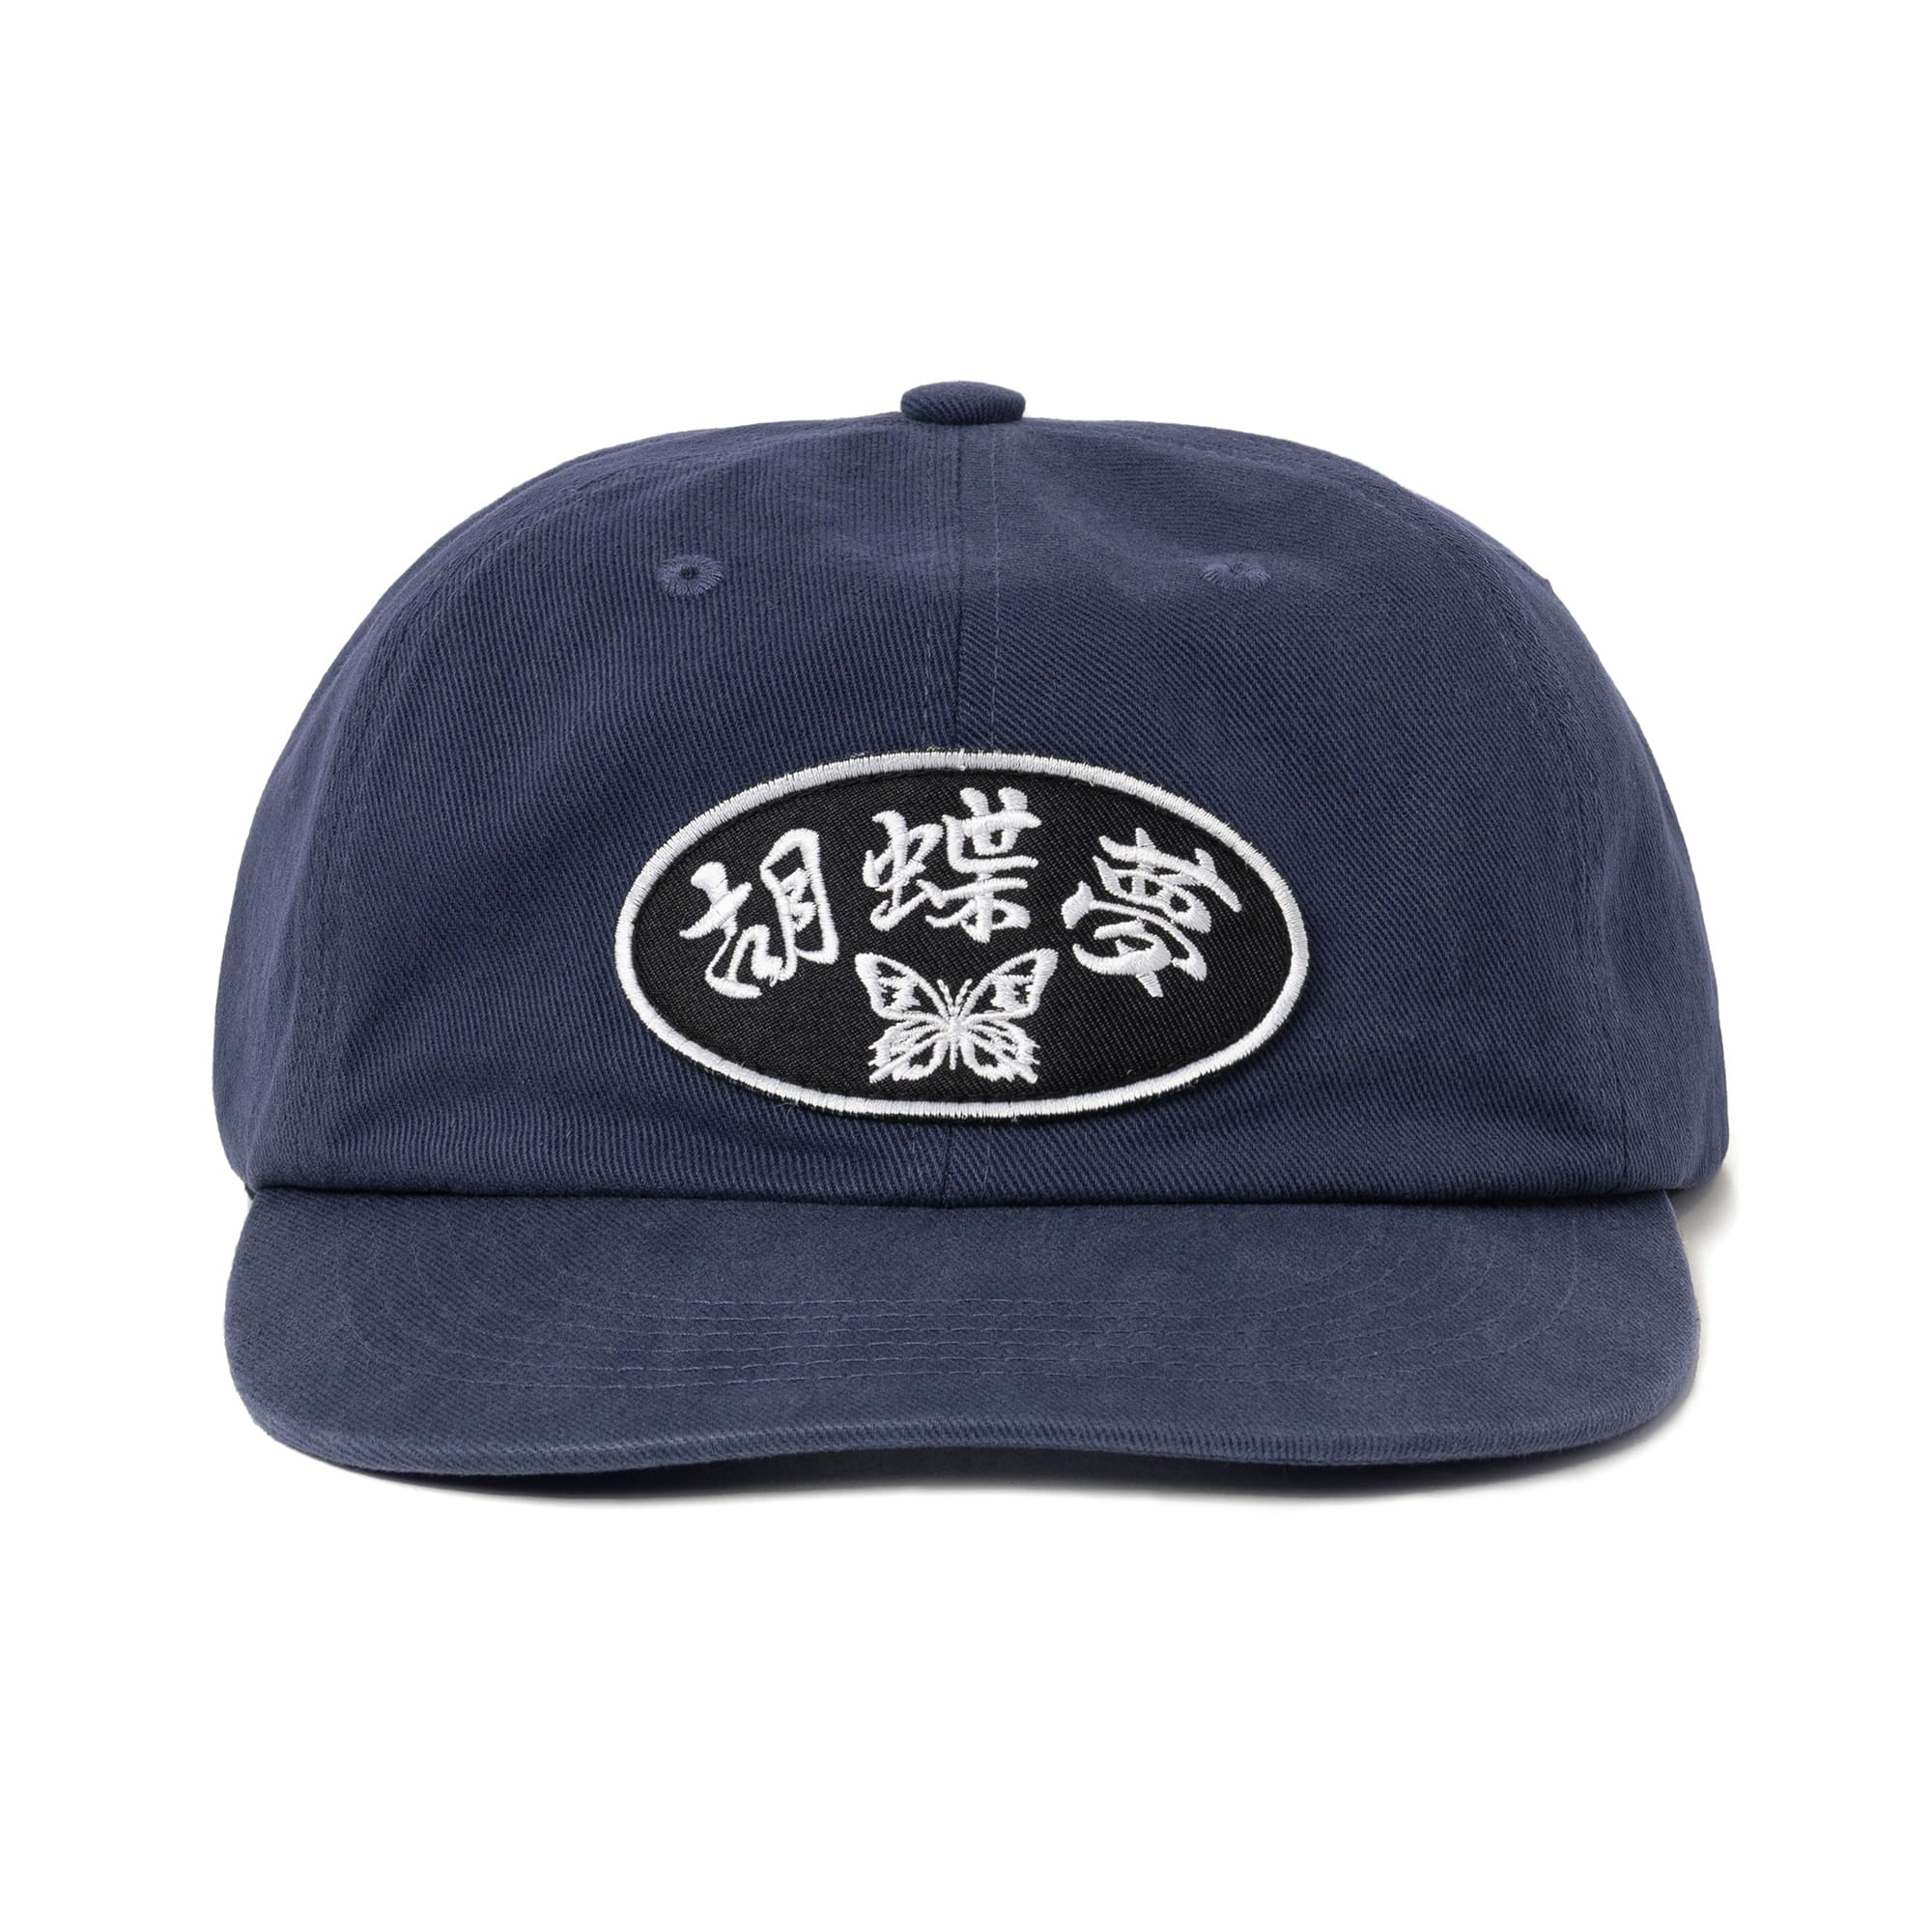 Wappen Washed Cap Navy